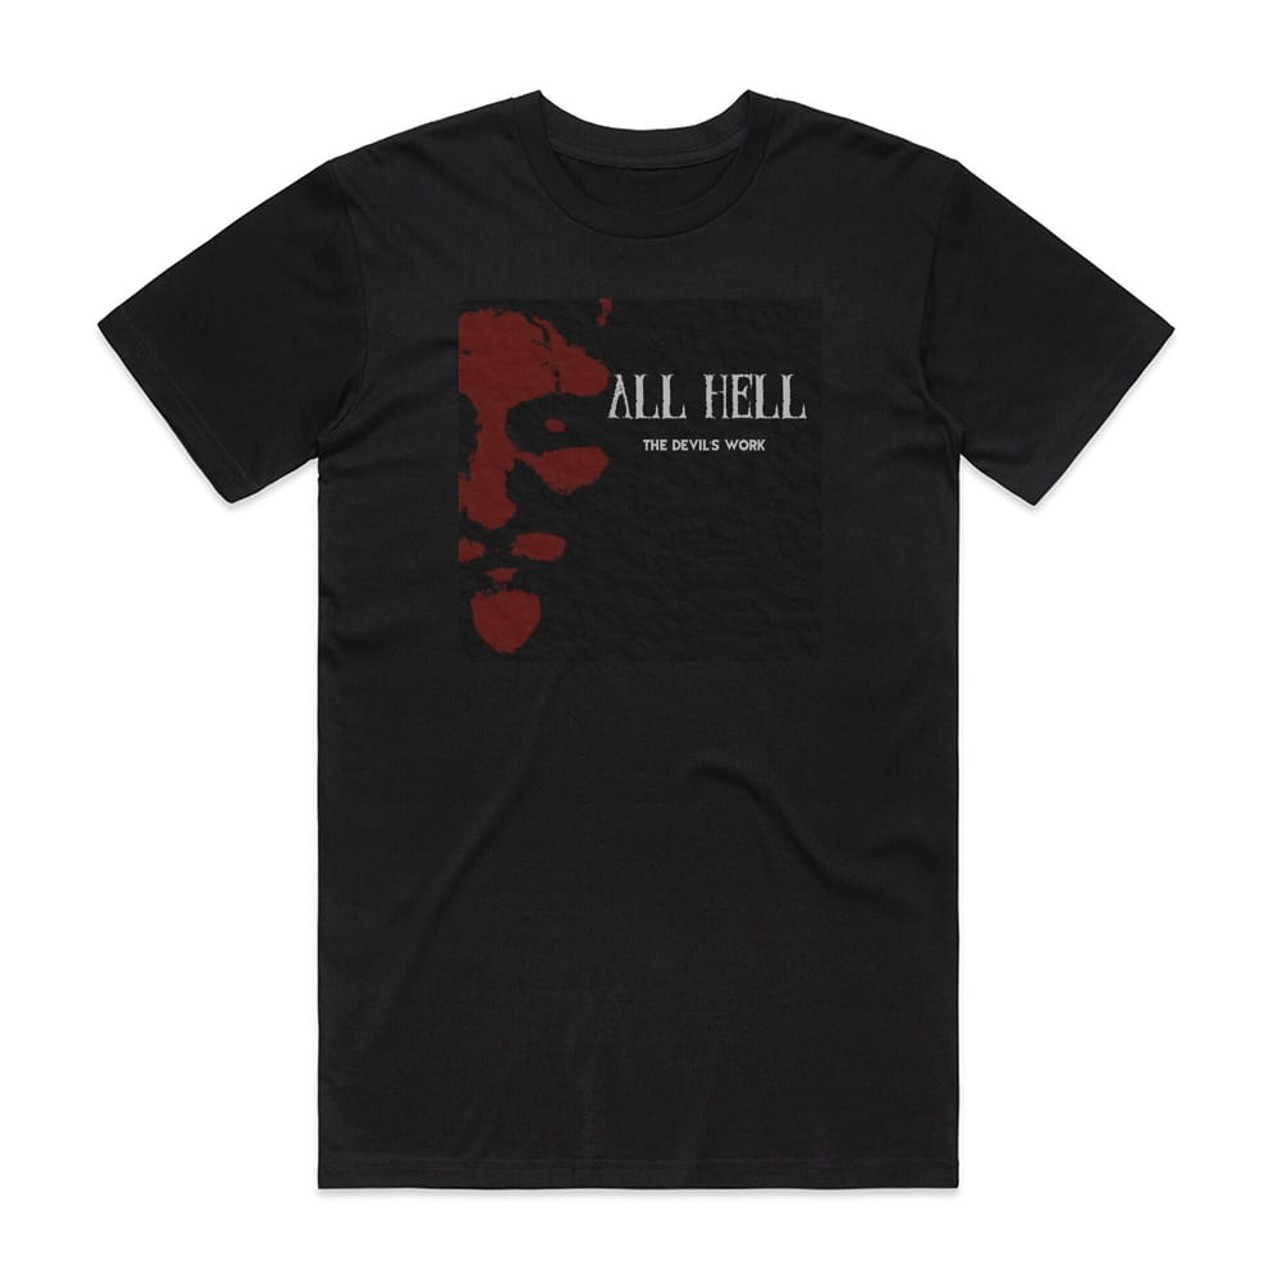 All Hell The Devils Work Album Cover T-Shirt Black